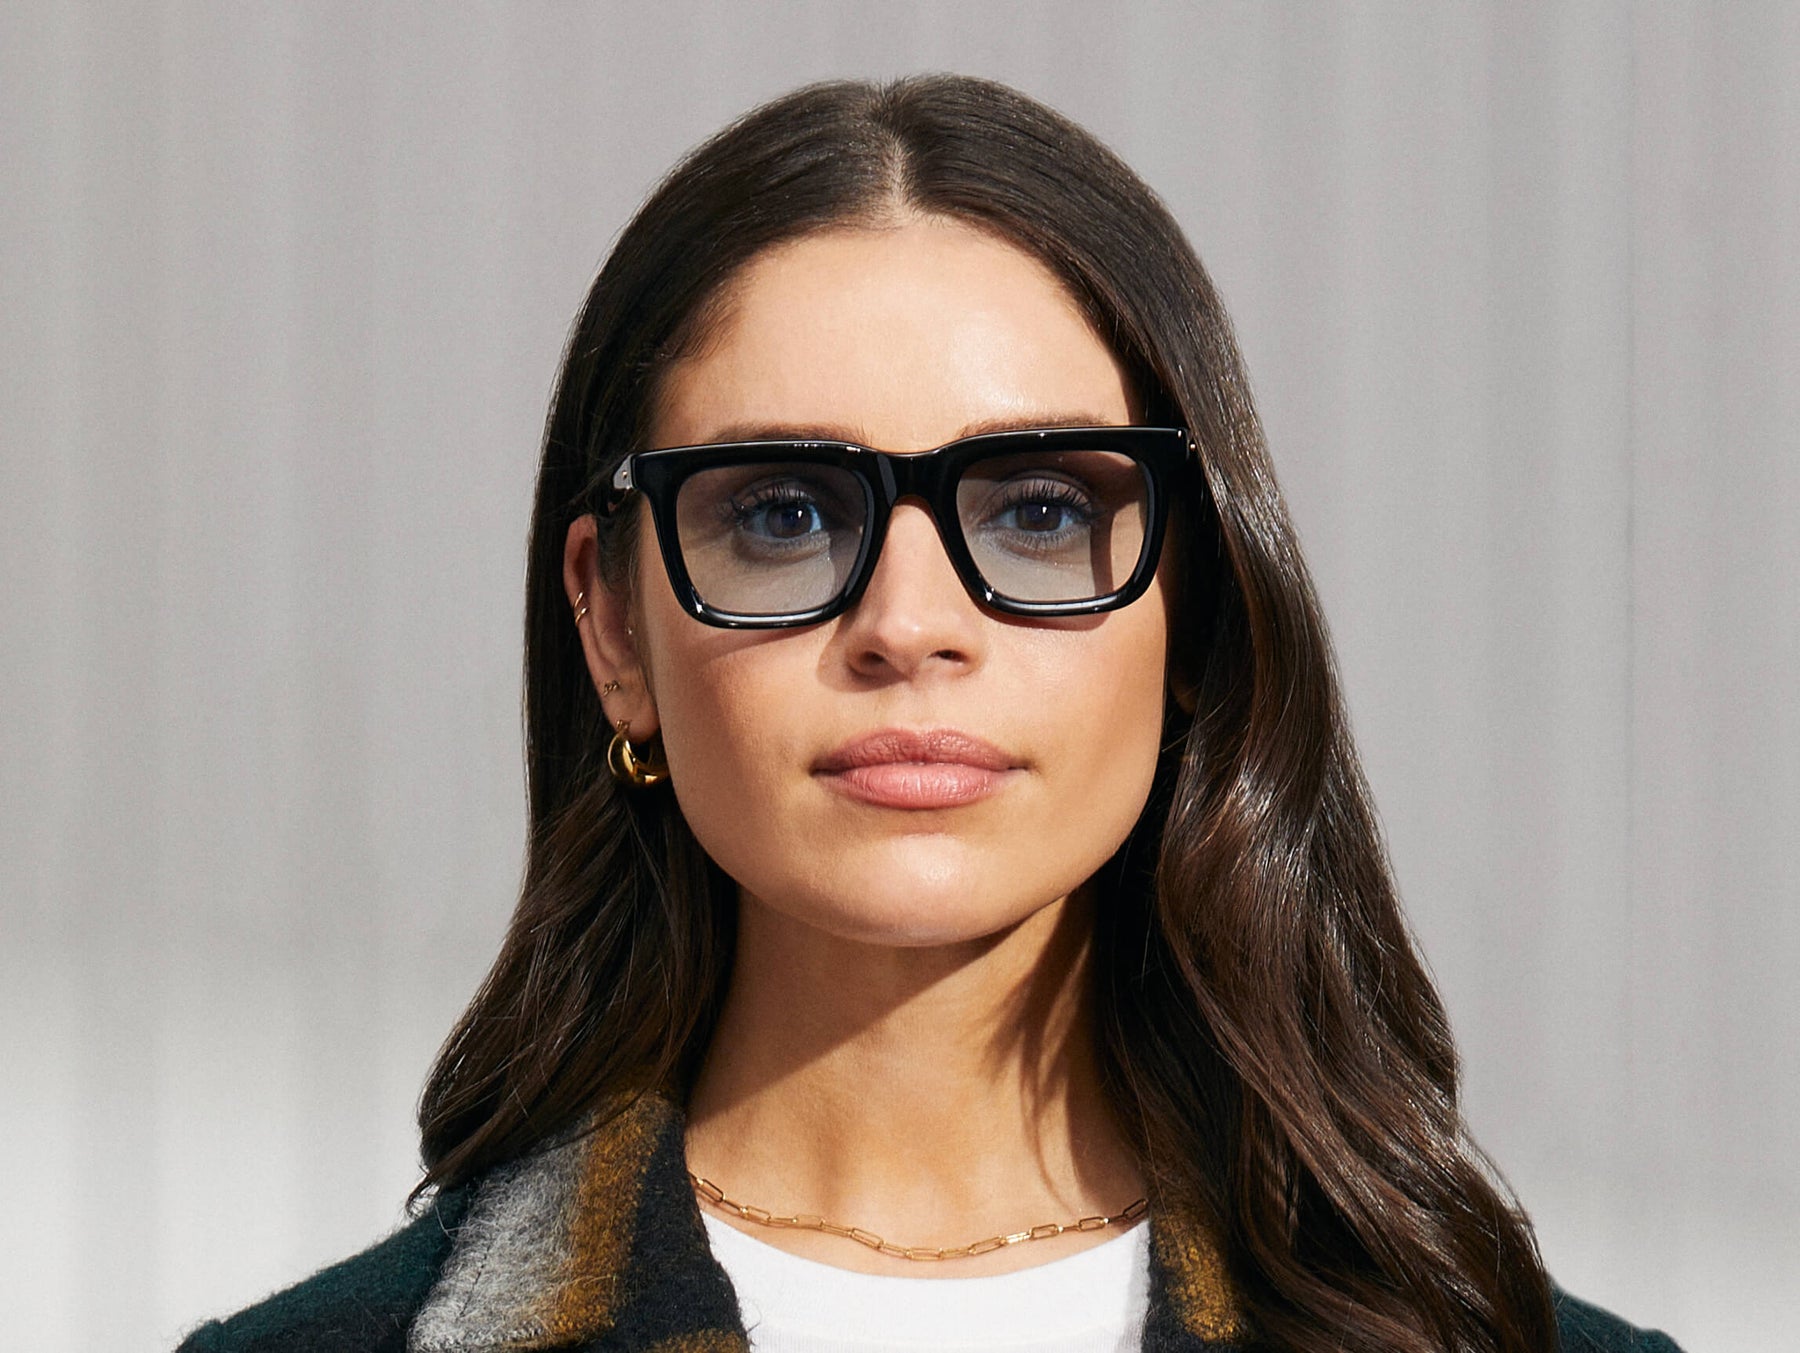 Model is wearing The RIZIK in Black in size 49 with Bel Air Blue Tinted Lenses